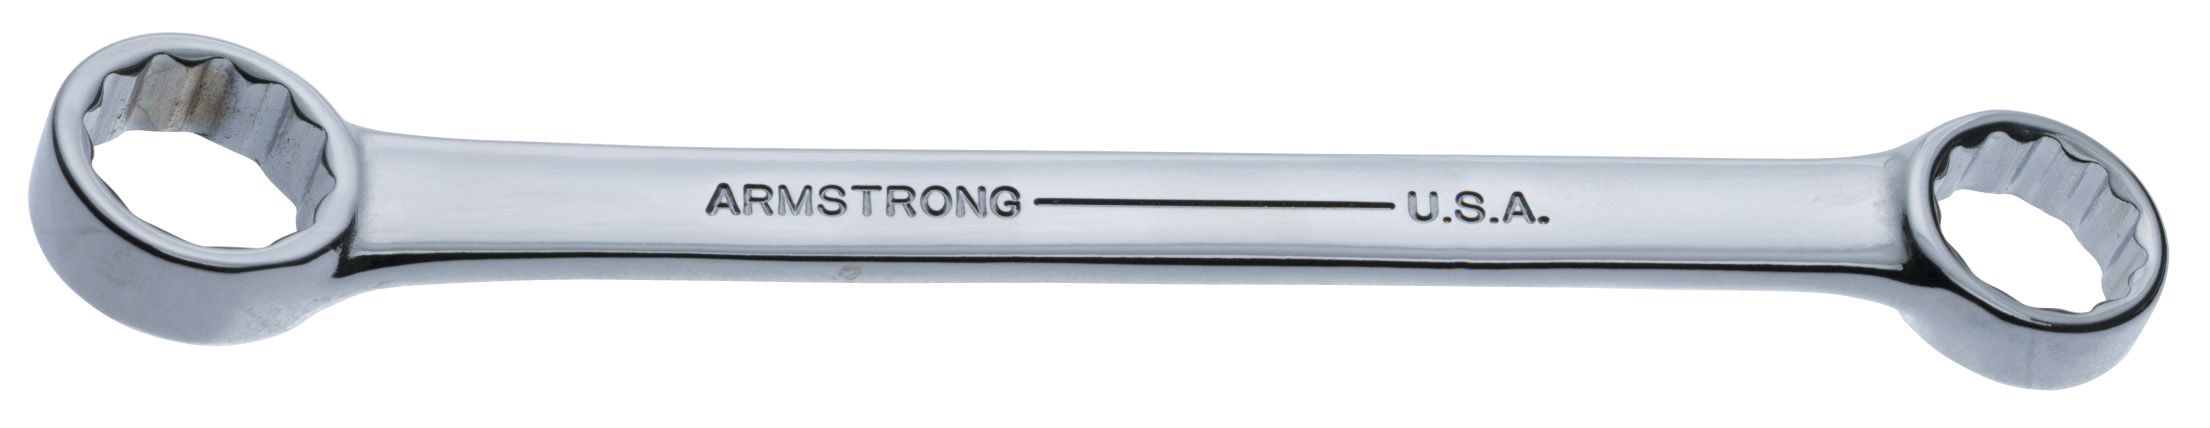 Armstrong 9/16 x 5/8 in. 12 pt. Full Polish 15 degree Offset Short Box Wrench